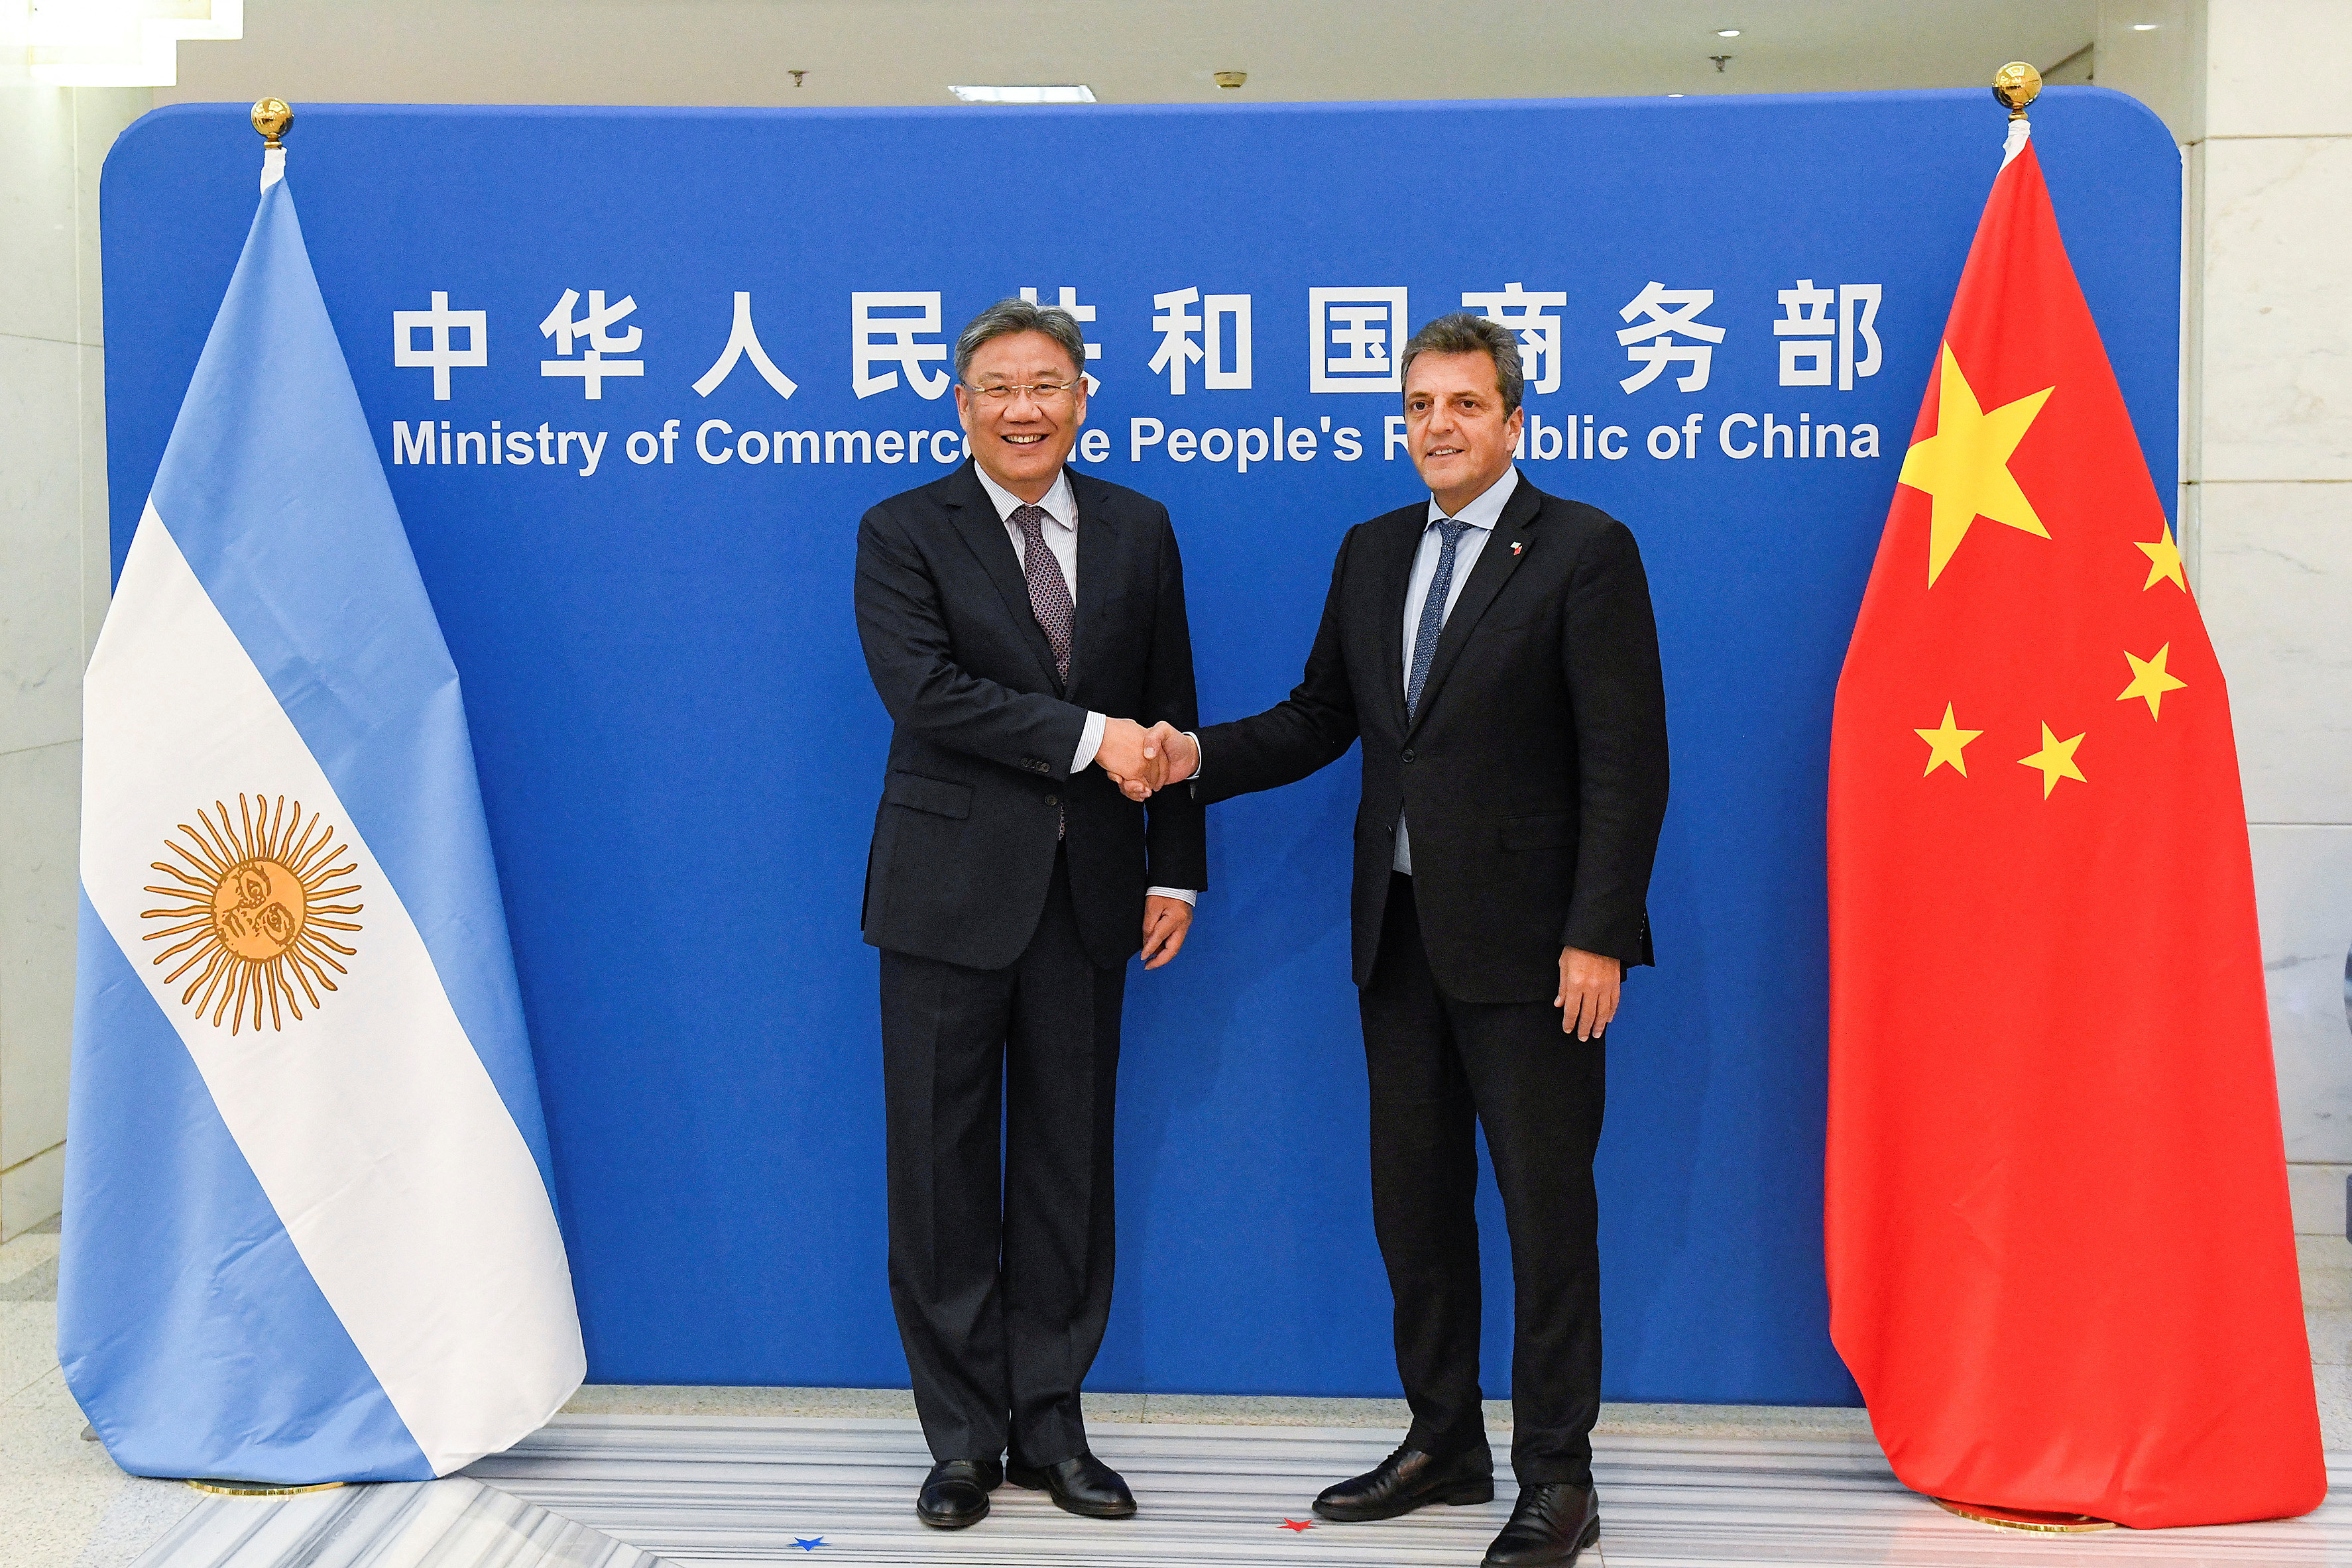 Argentina's Economy Minister Sergio Tomas Massa meets Chinese Commerce Minister Wang Wentao in Beijing